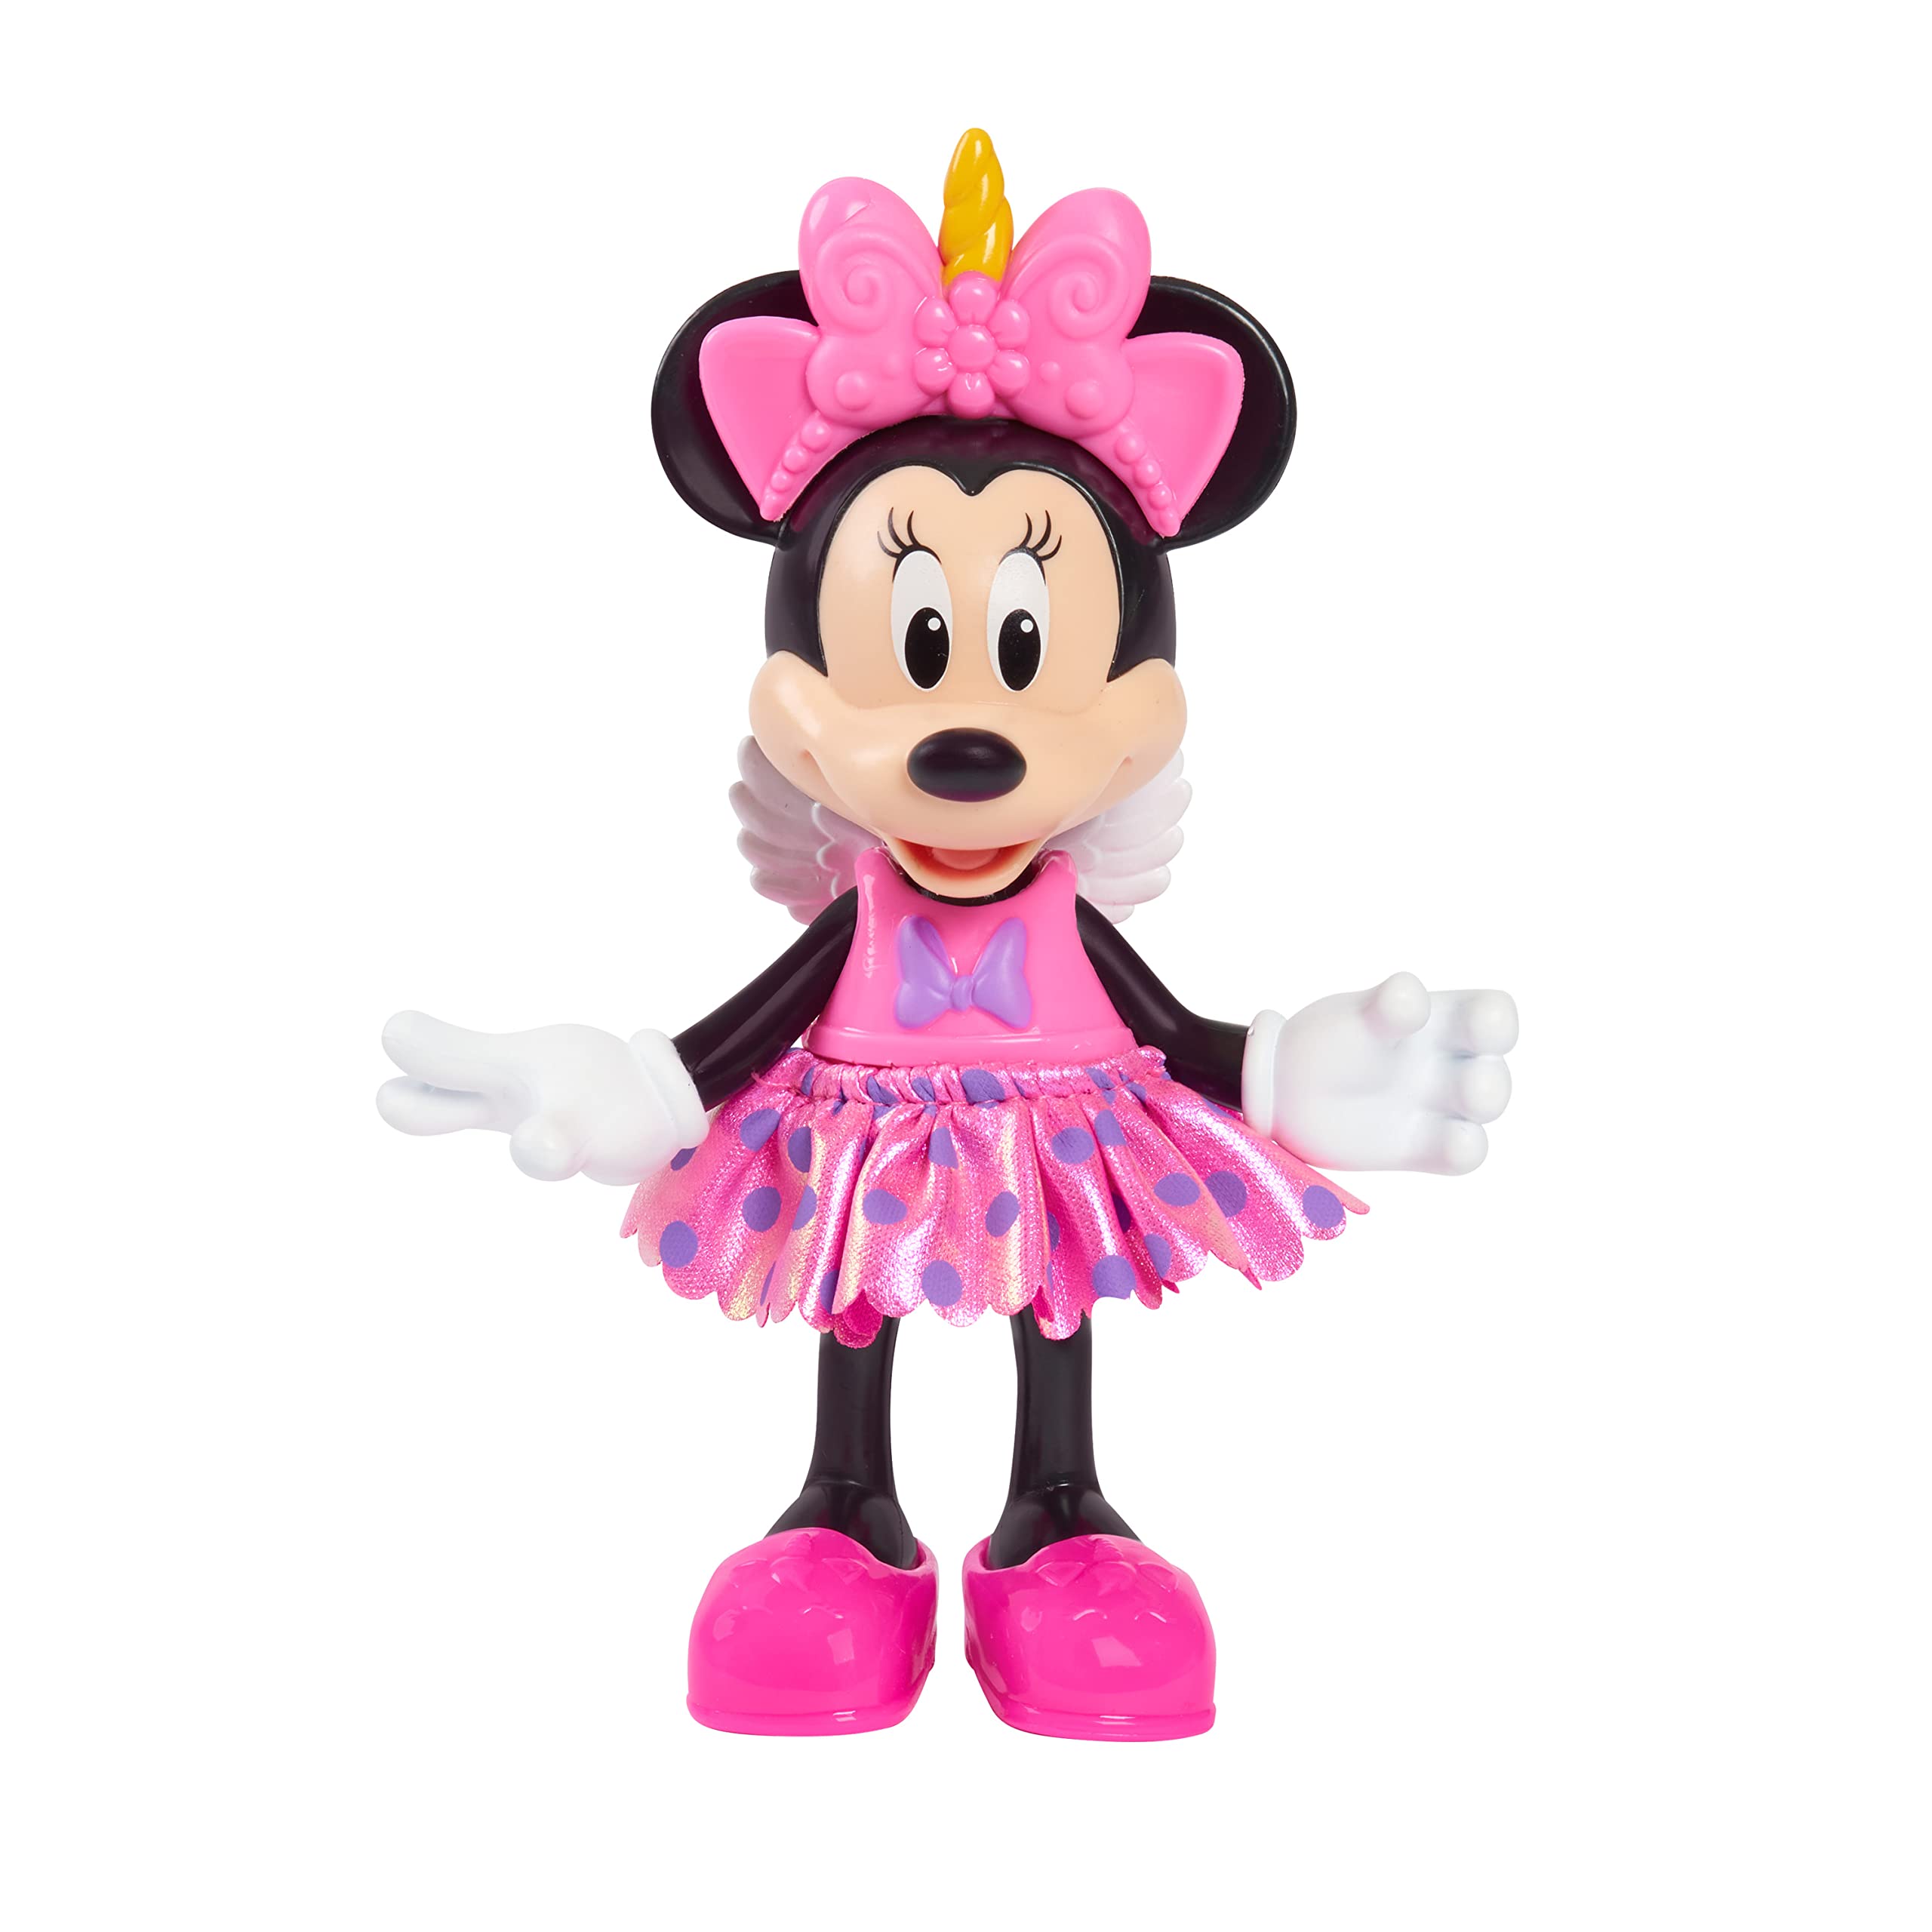 Minnie Mouse Disney Junior Minnie Mouse Fabulous Fashion Doll Unicorn Fantasy, Pretend Play, Kids Toys for Ages 3 Up by Just Play